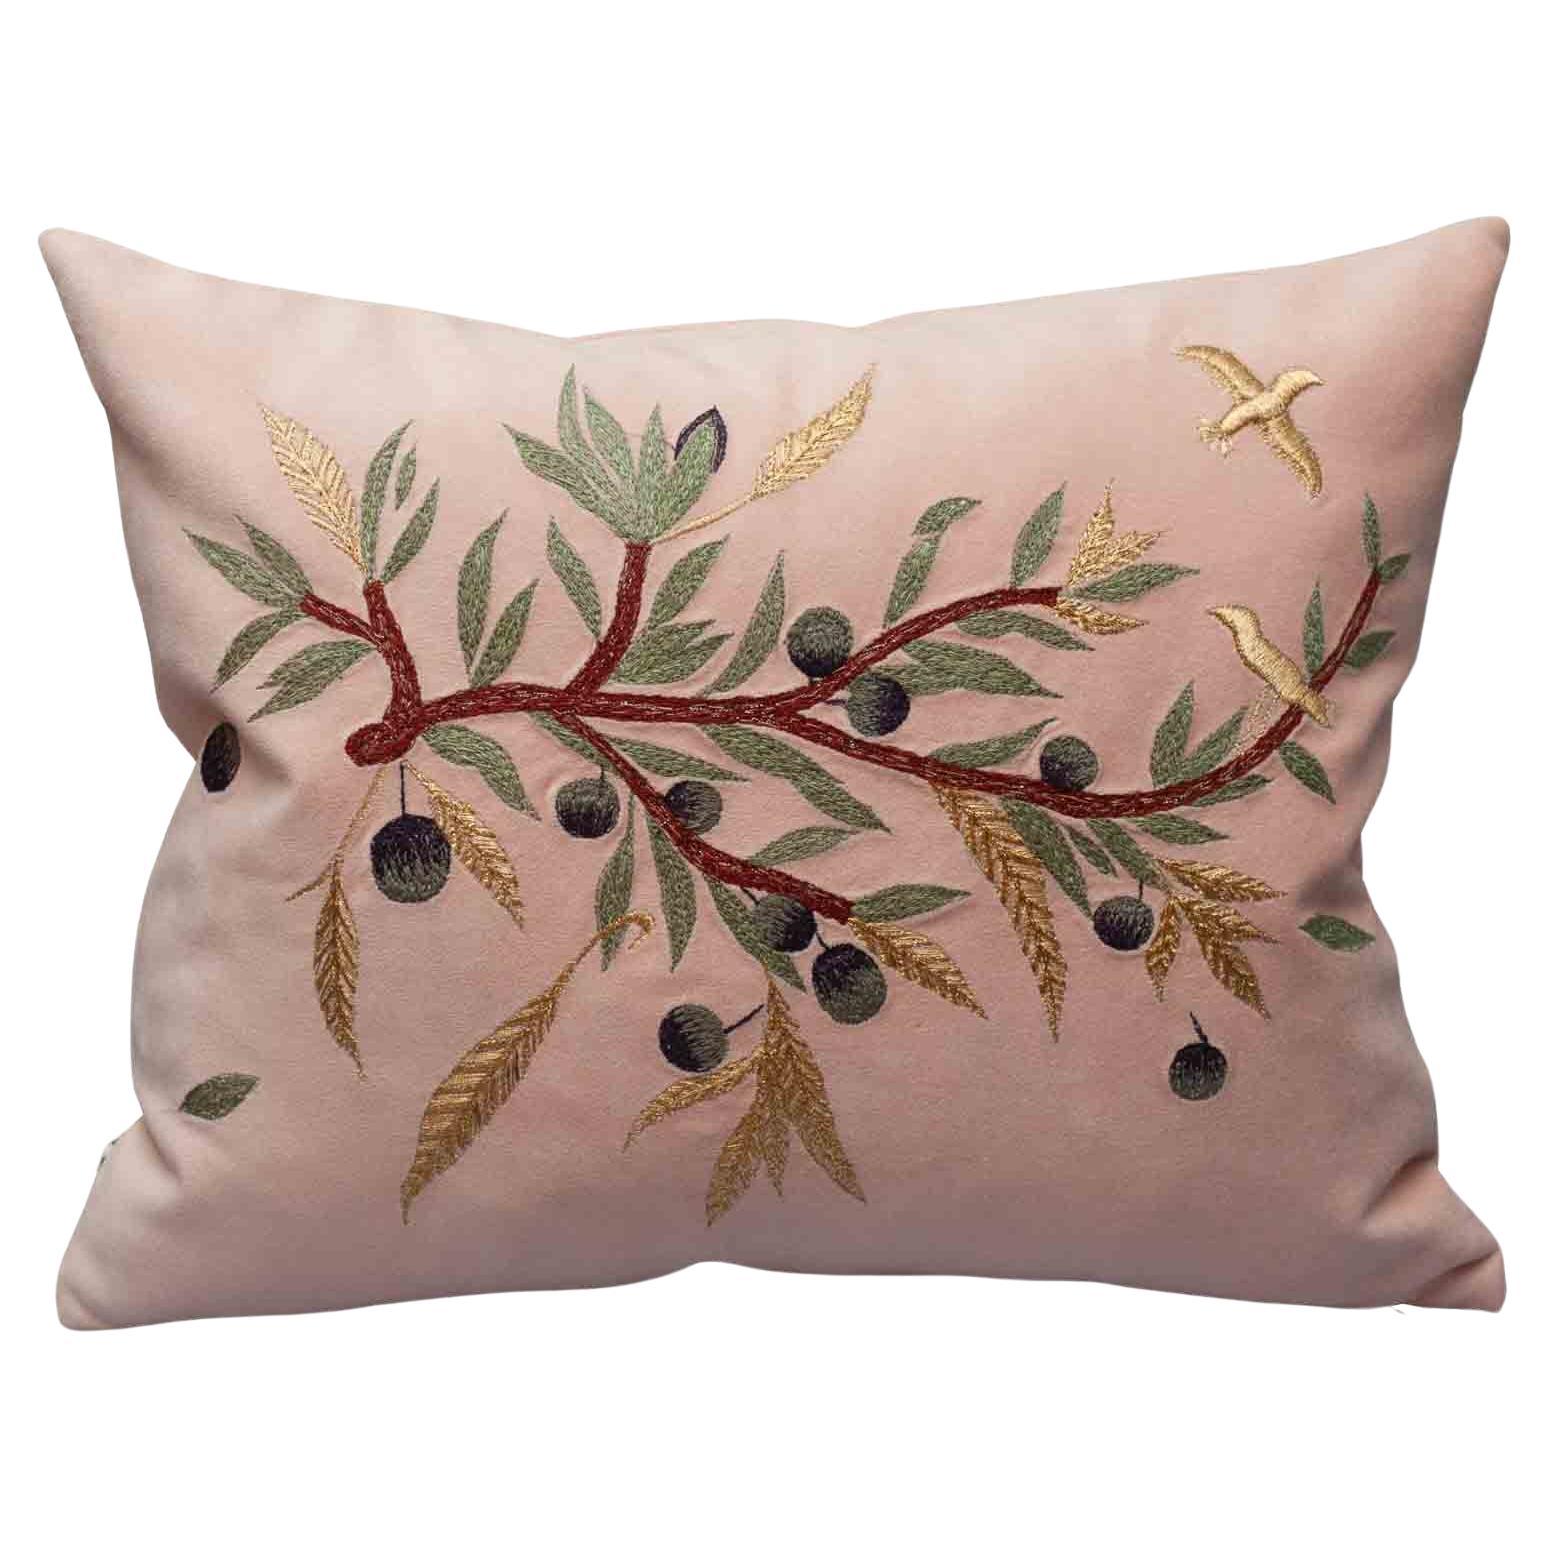 Contemporary Embroidered Pillow on Soft Pink Ultrasuede with Dove & Olive Branch